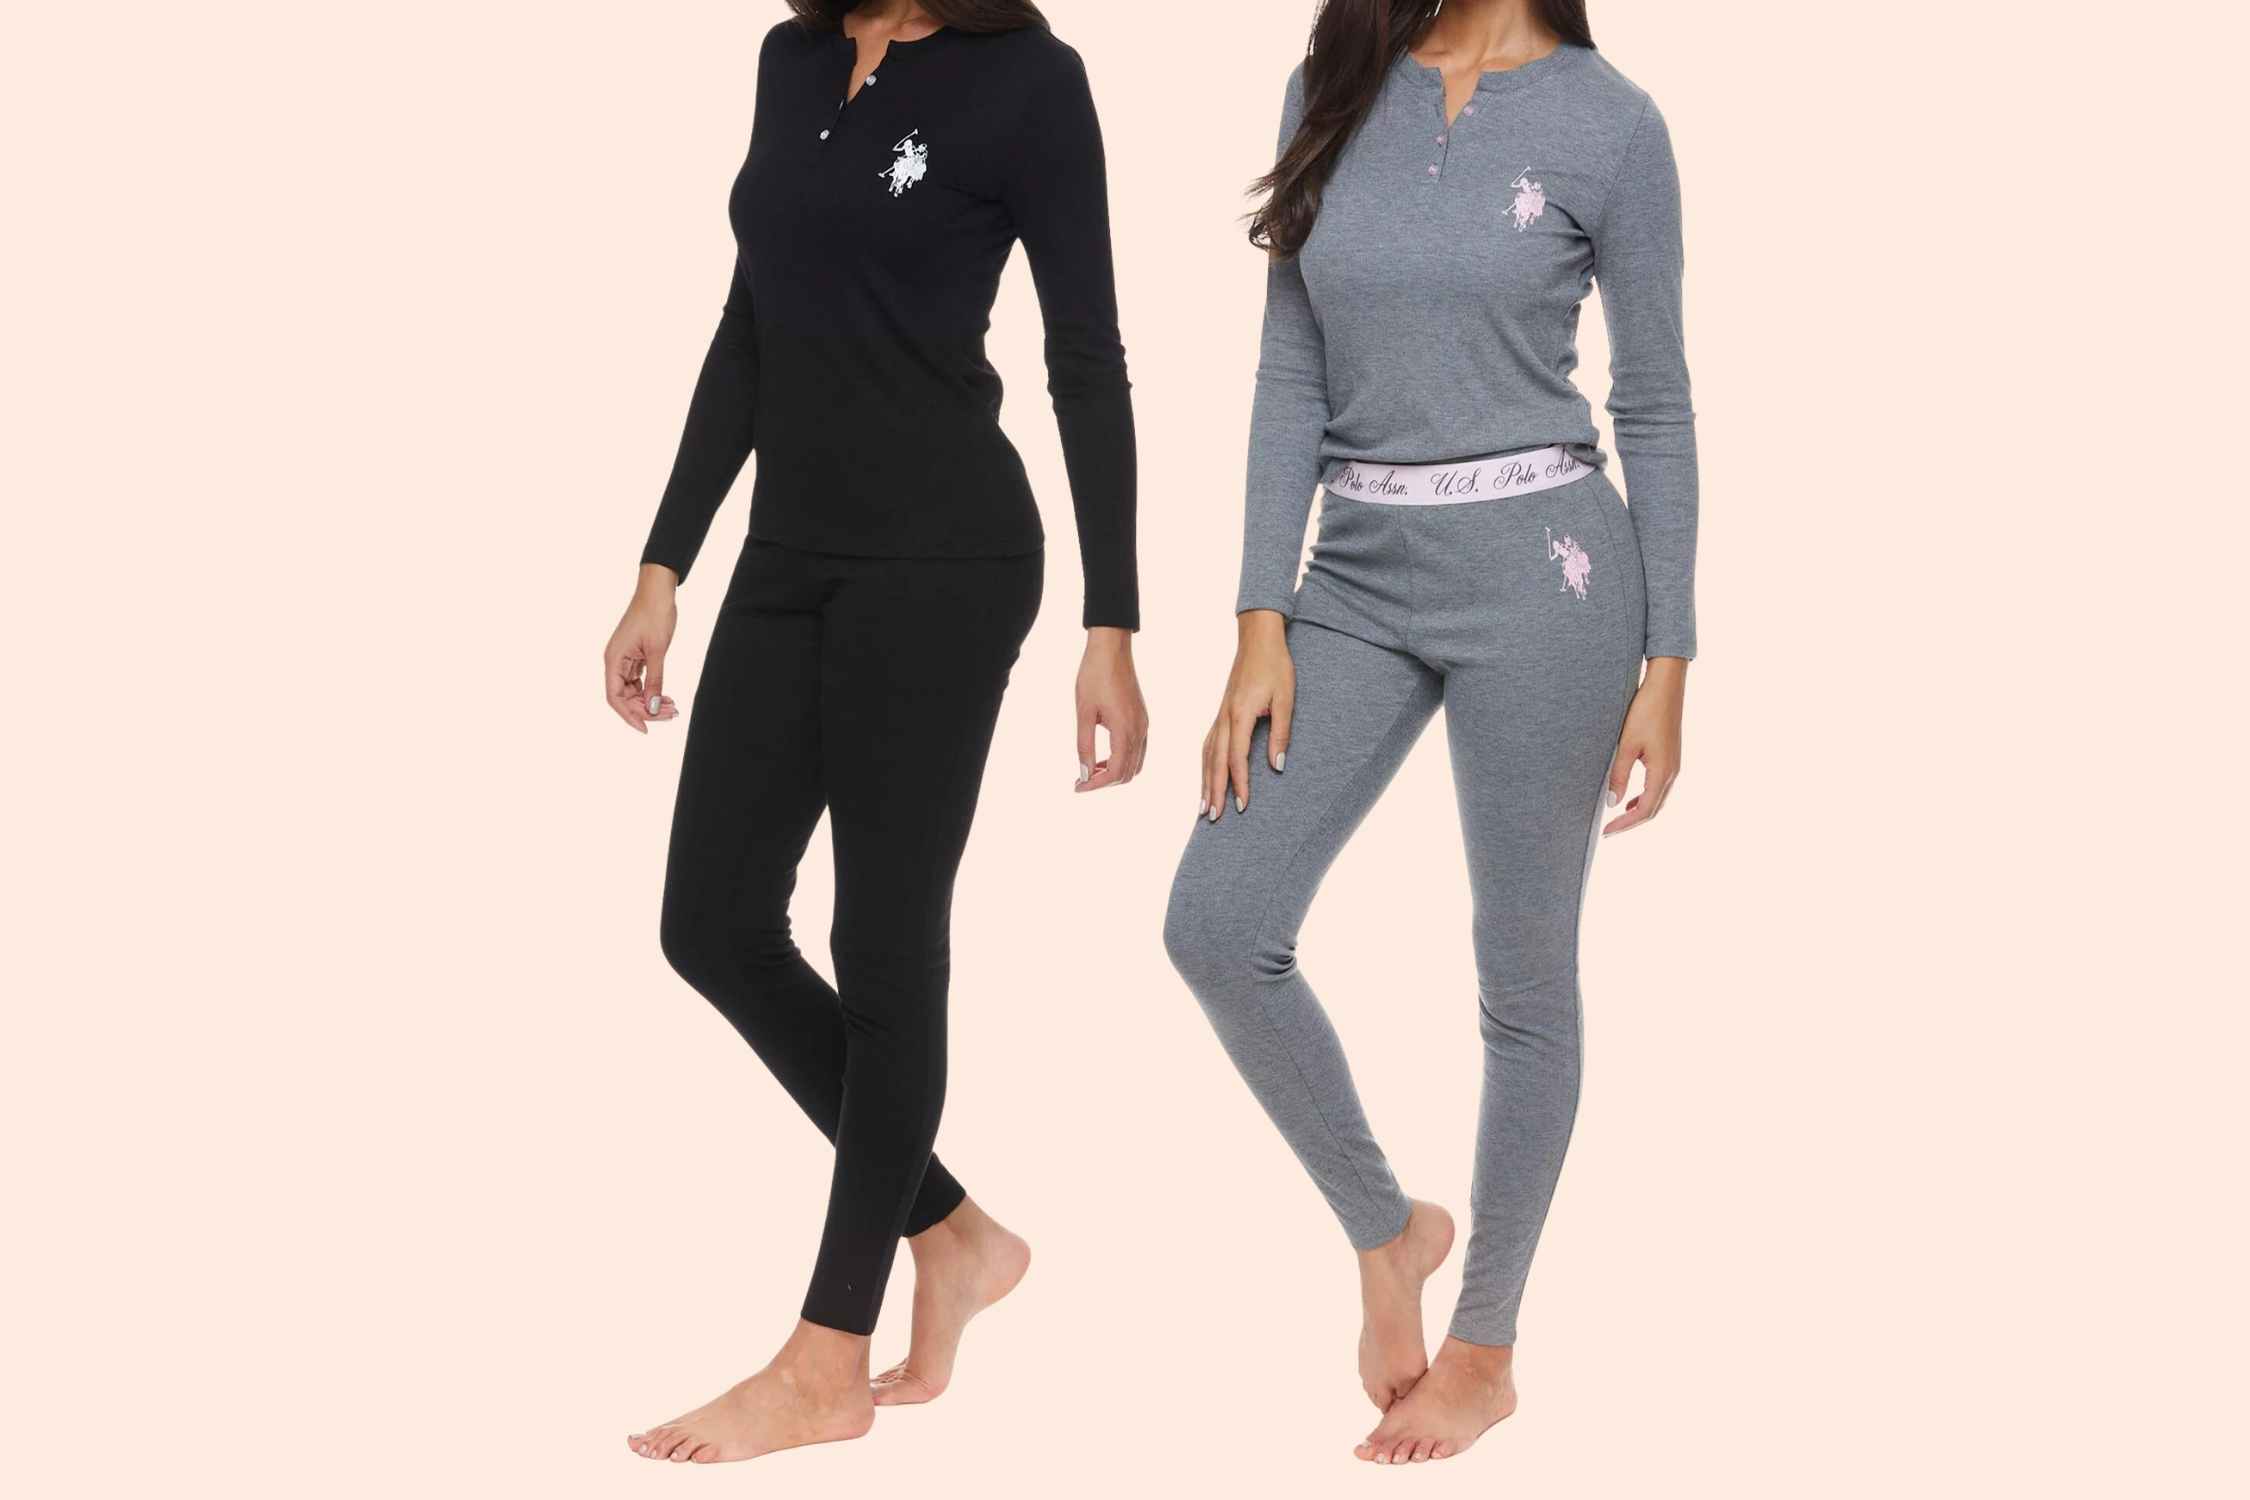 U.S. Polo Assn. Women's Loungewear Sets on Clearance for $11 at Walmart